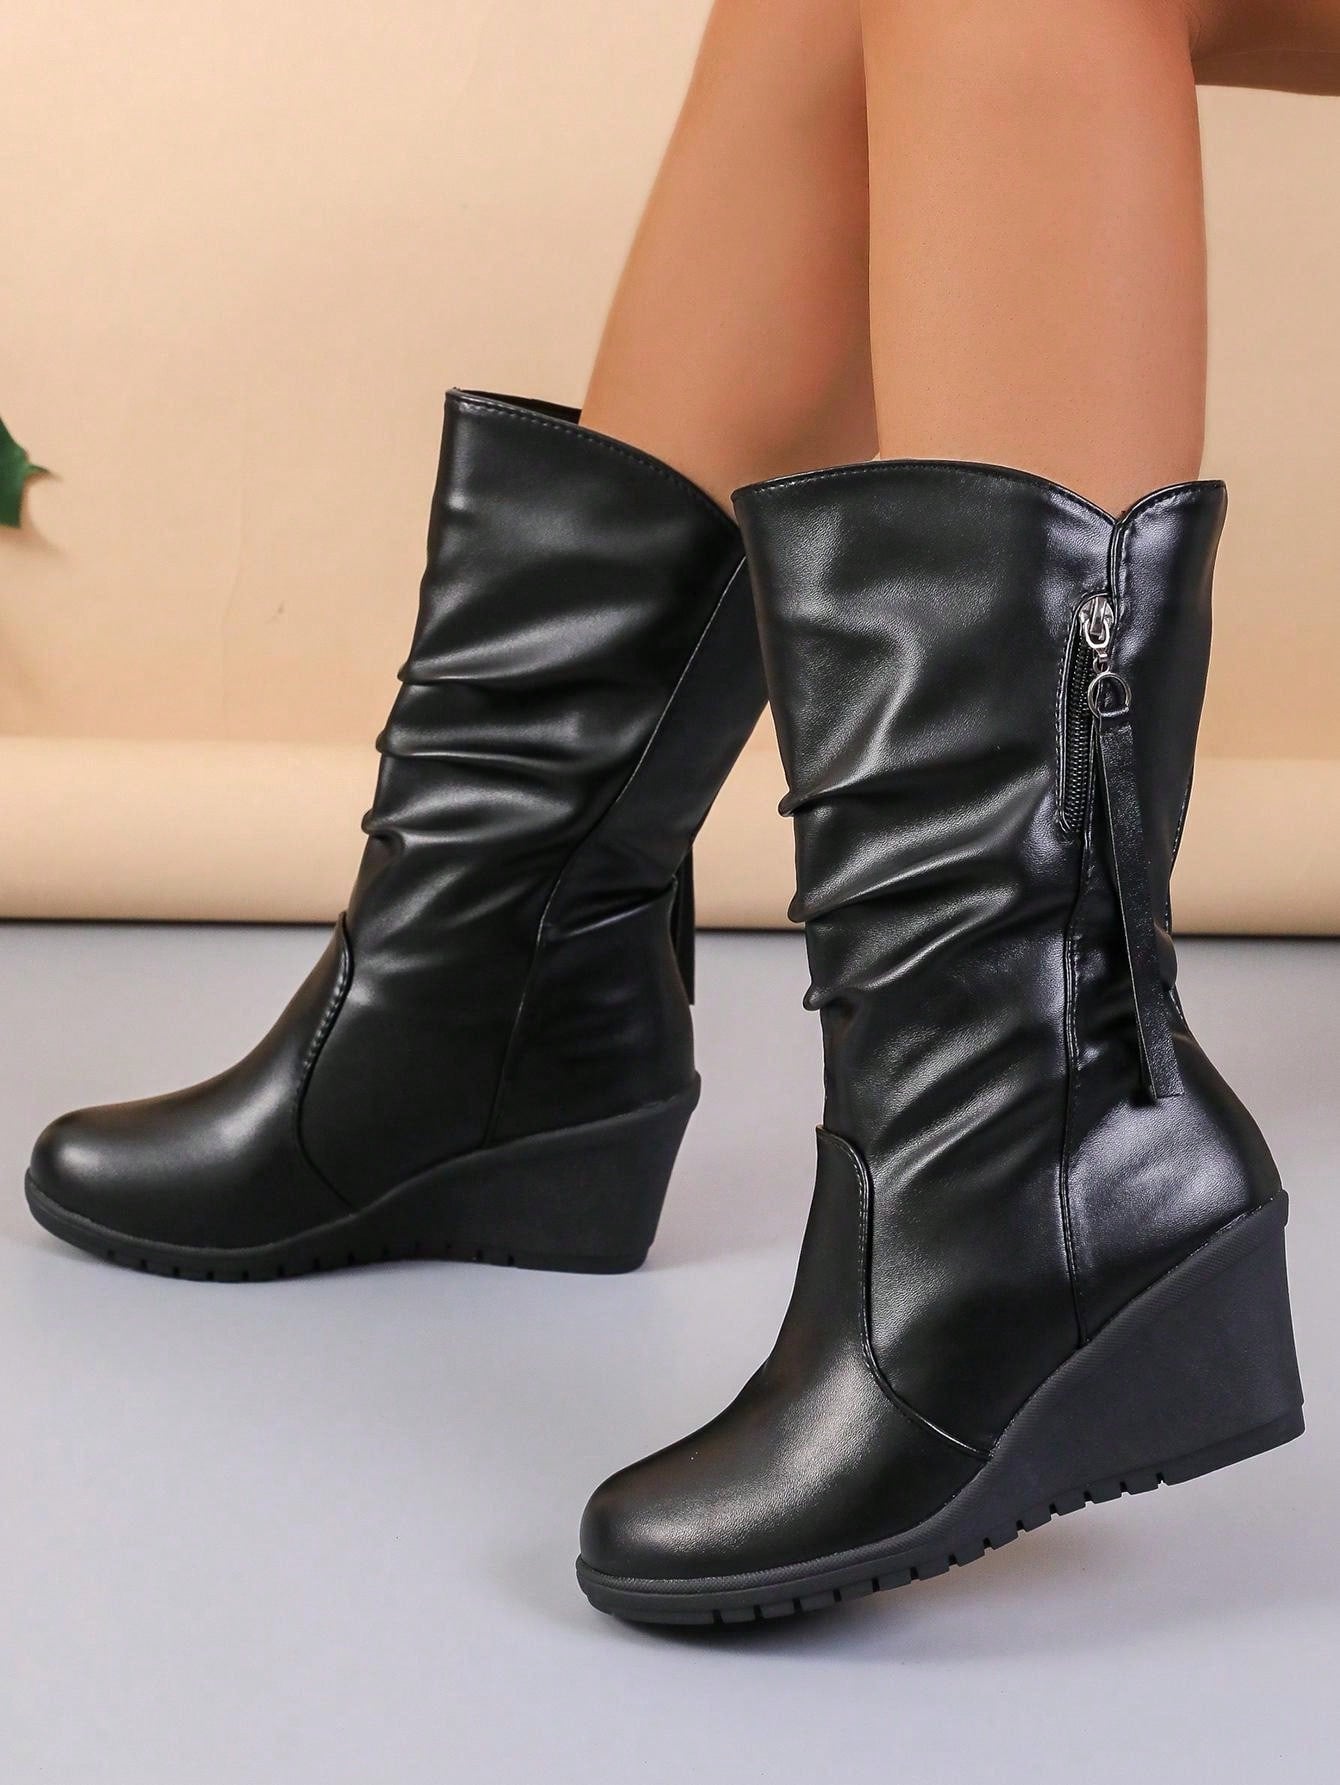 Wedge Heel Women's Calf Boots With Loose Round Toe And Side Zipper, Fashion Boots